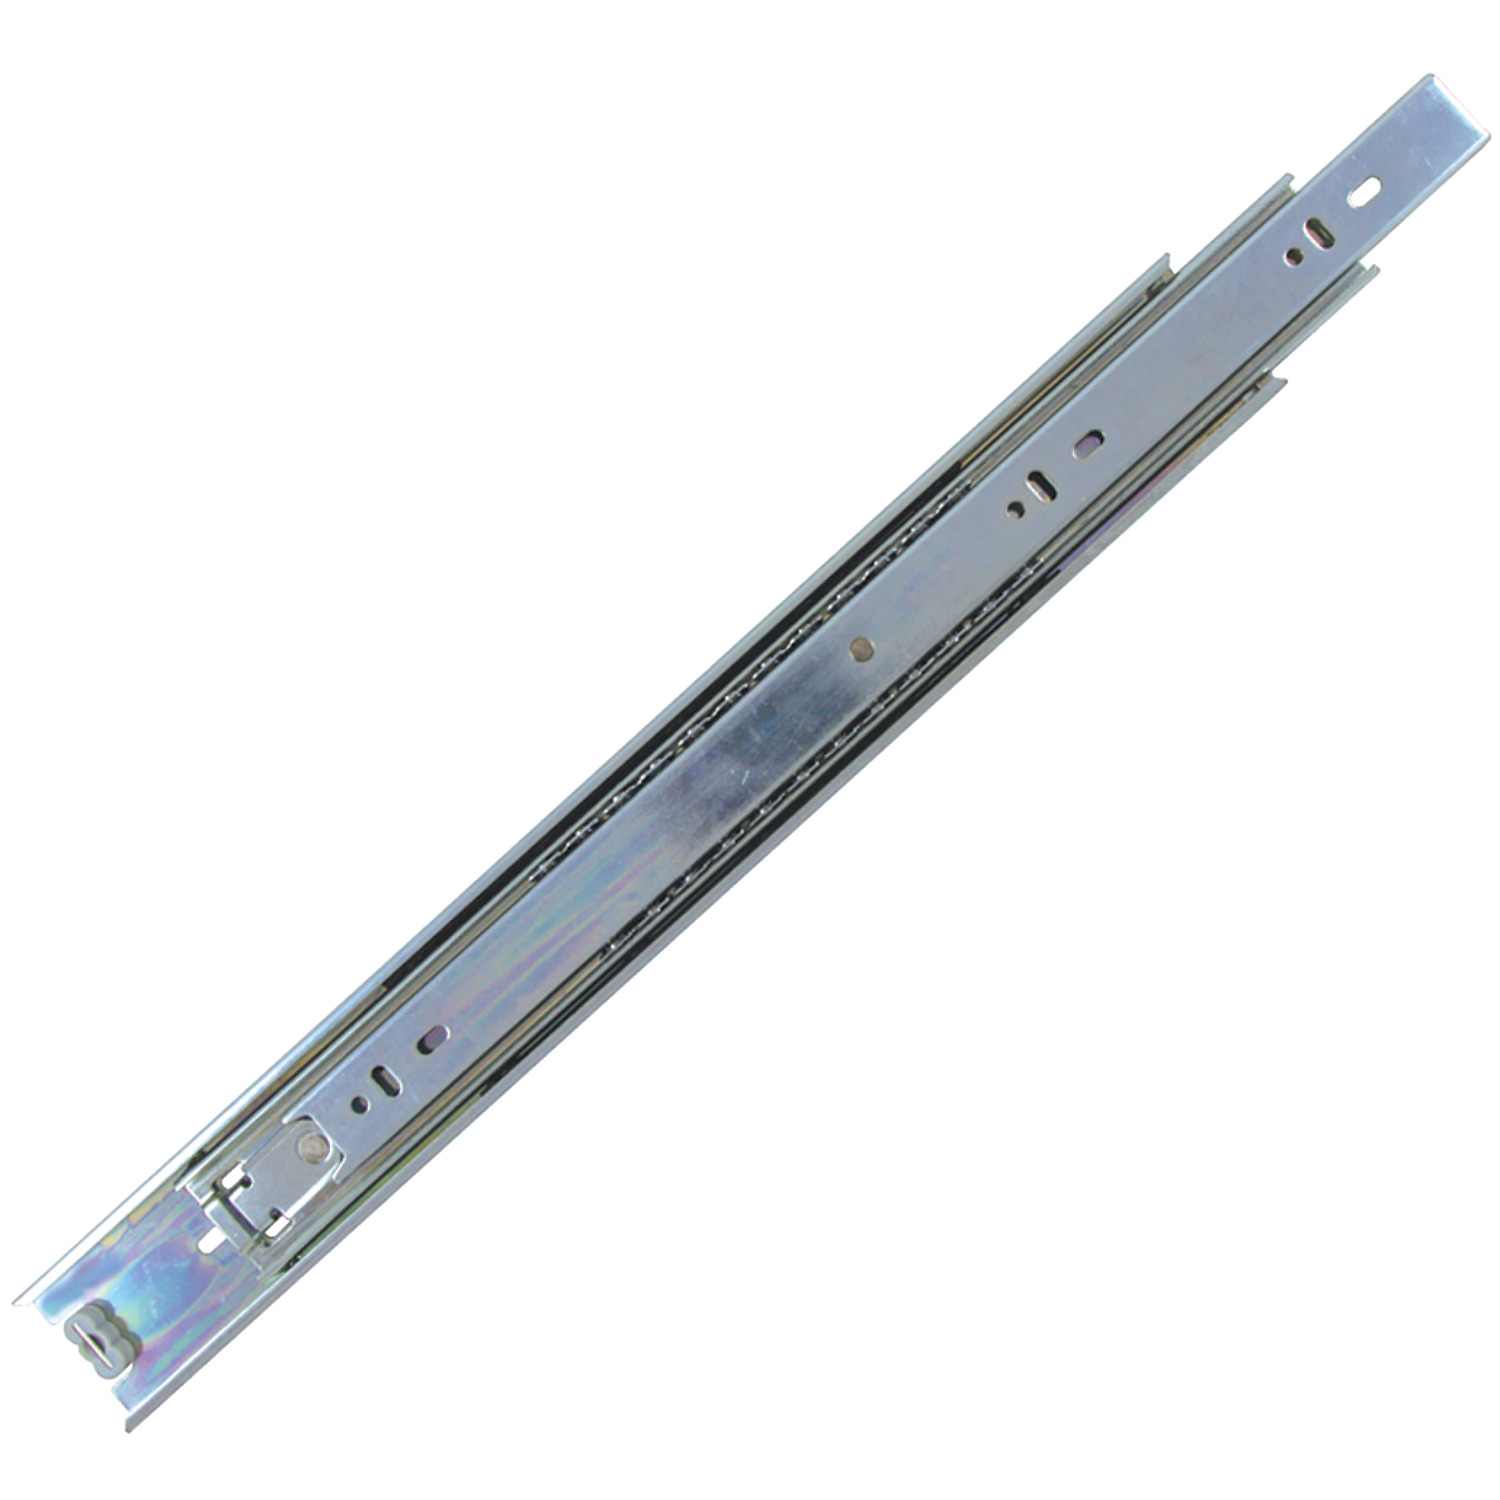 P5100.AC0300 Drawer Slide Full Extn Length 300; Load 45kg per pair. Sold Individually. Lever Disconnect; Positive Lock